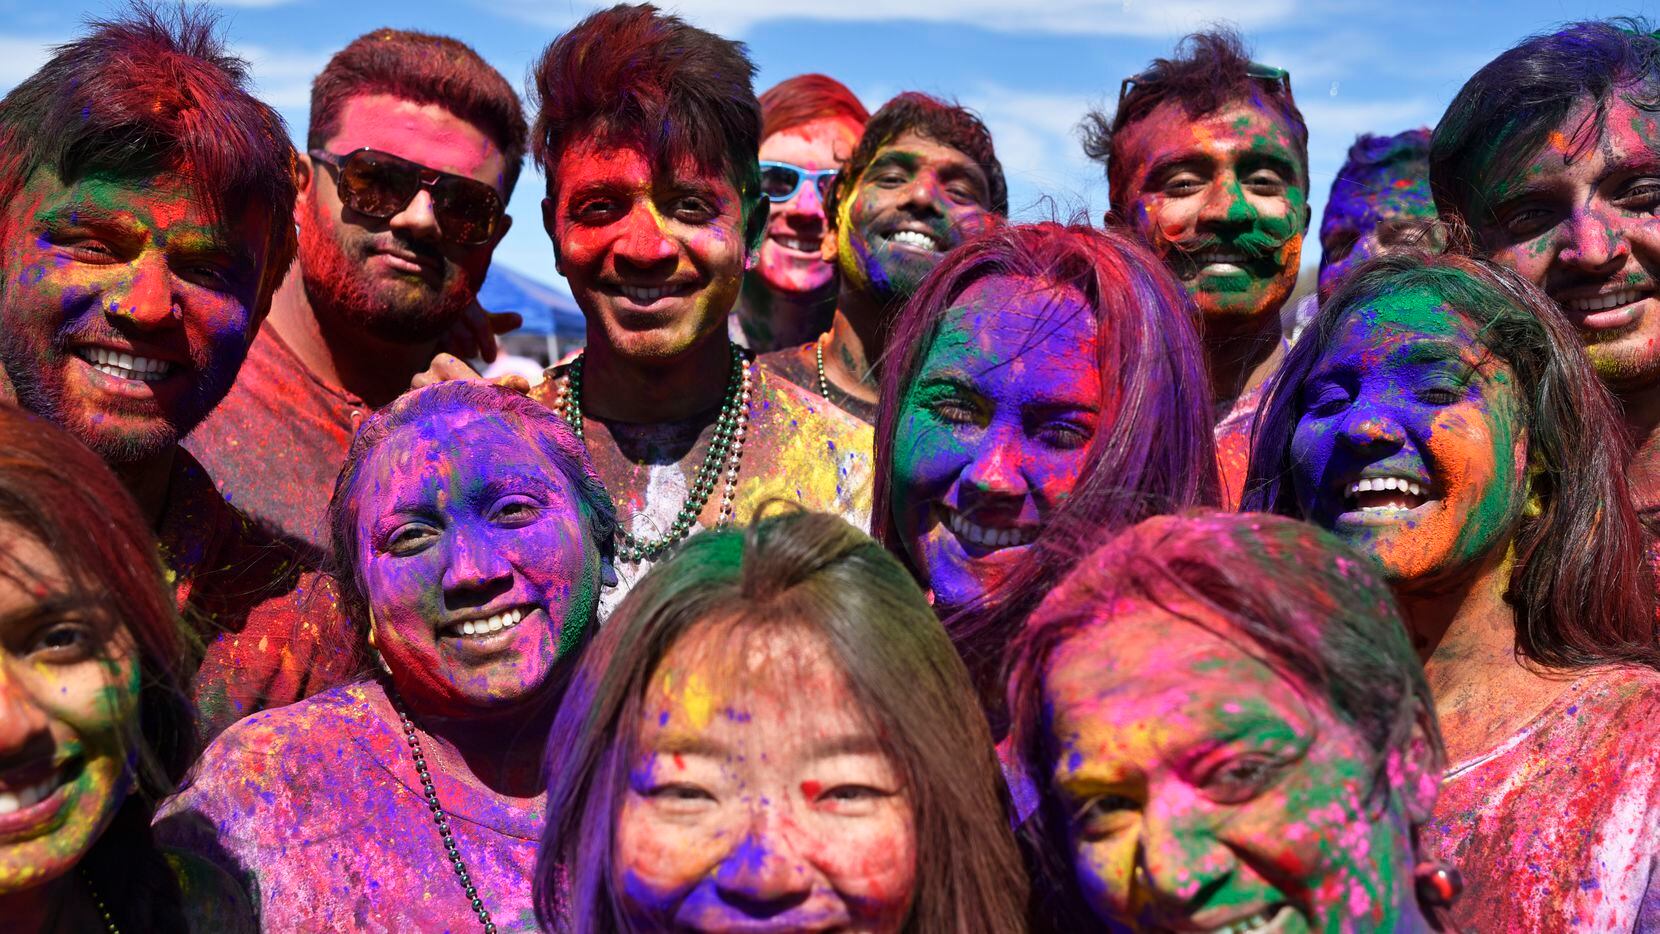 Festival goers celebrate Holi with colored pigment on their face and bodies during the...